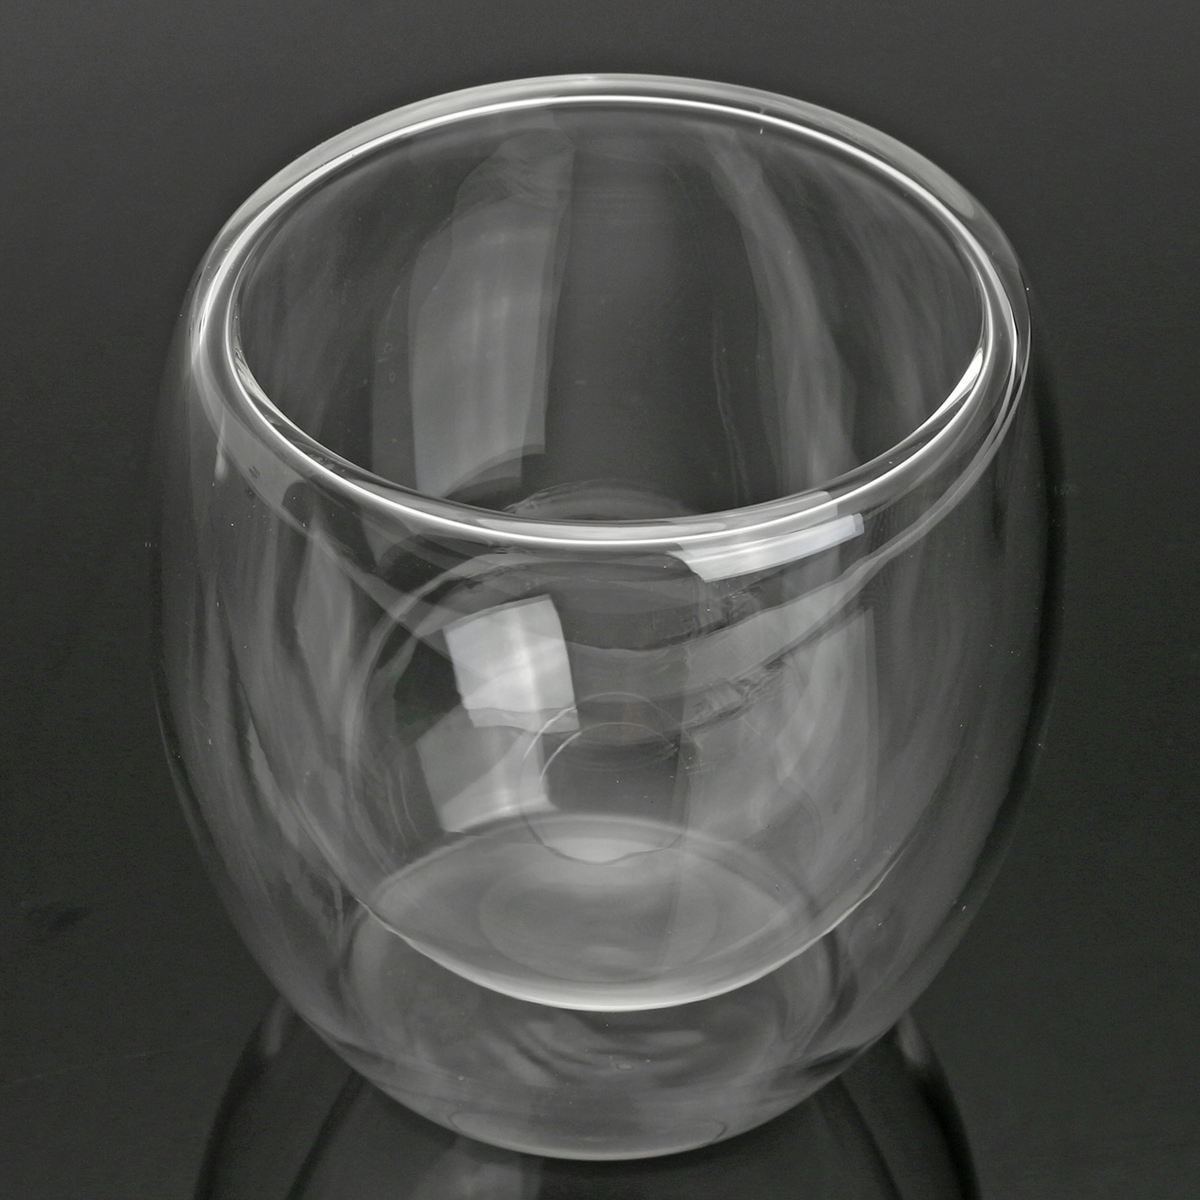 80ml-Clear-Glass-Double-Wall-Mug-Cup-Insulated-Thermal-Office-Tea-Drinking-Tea-Container-1454945-2